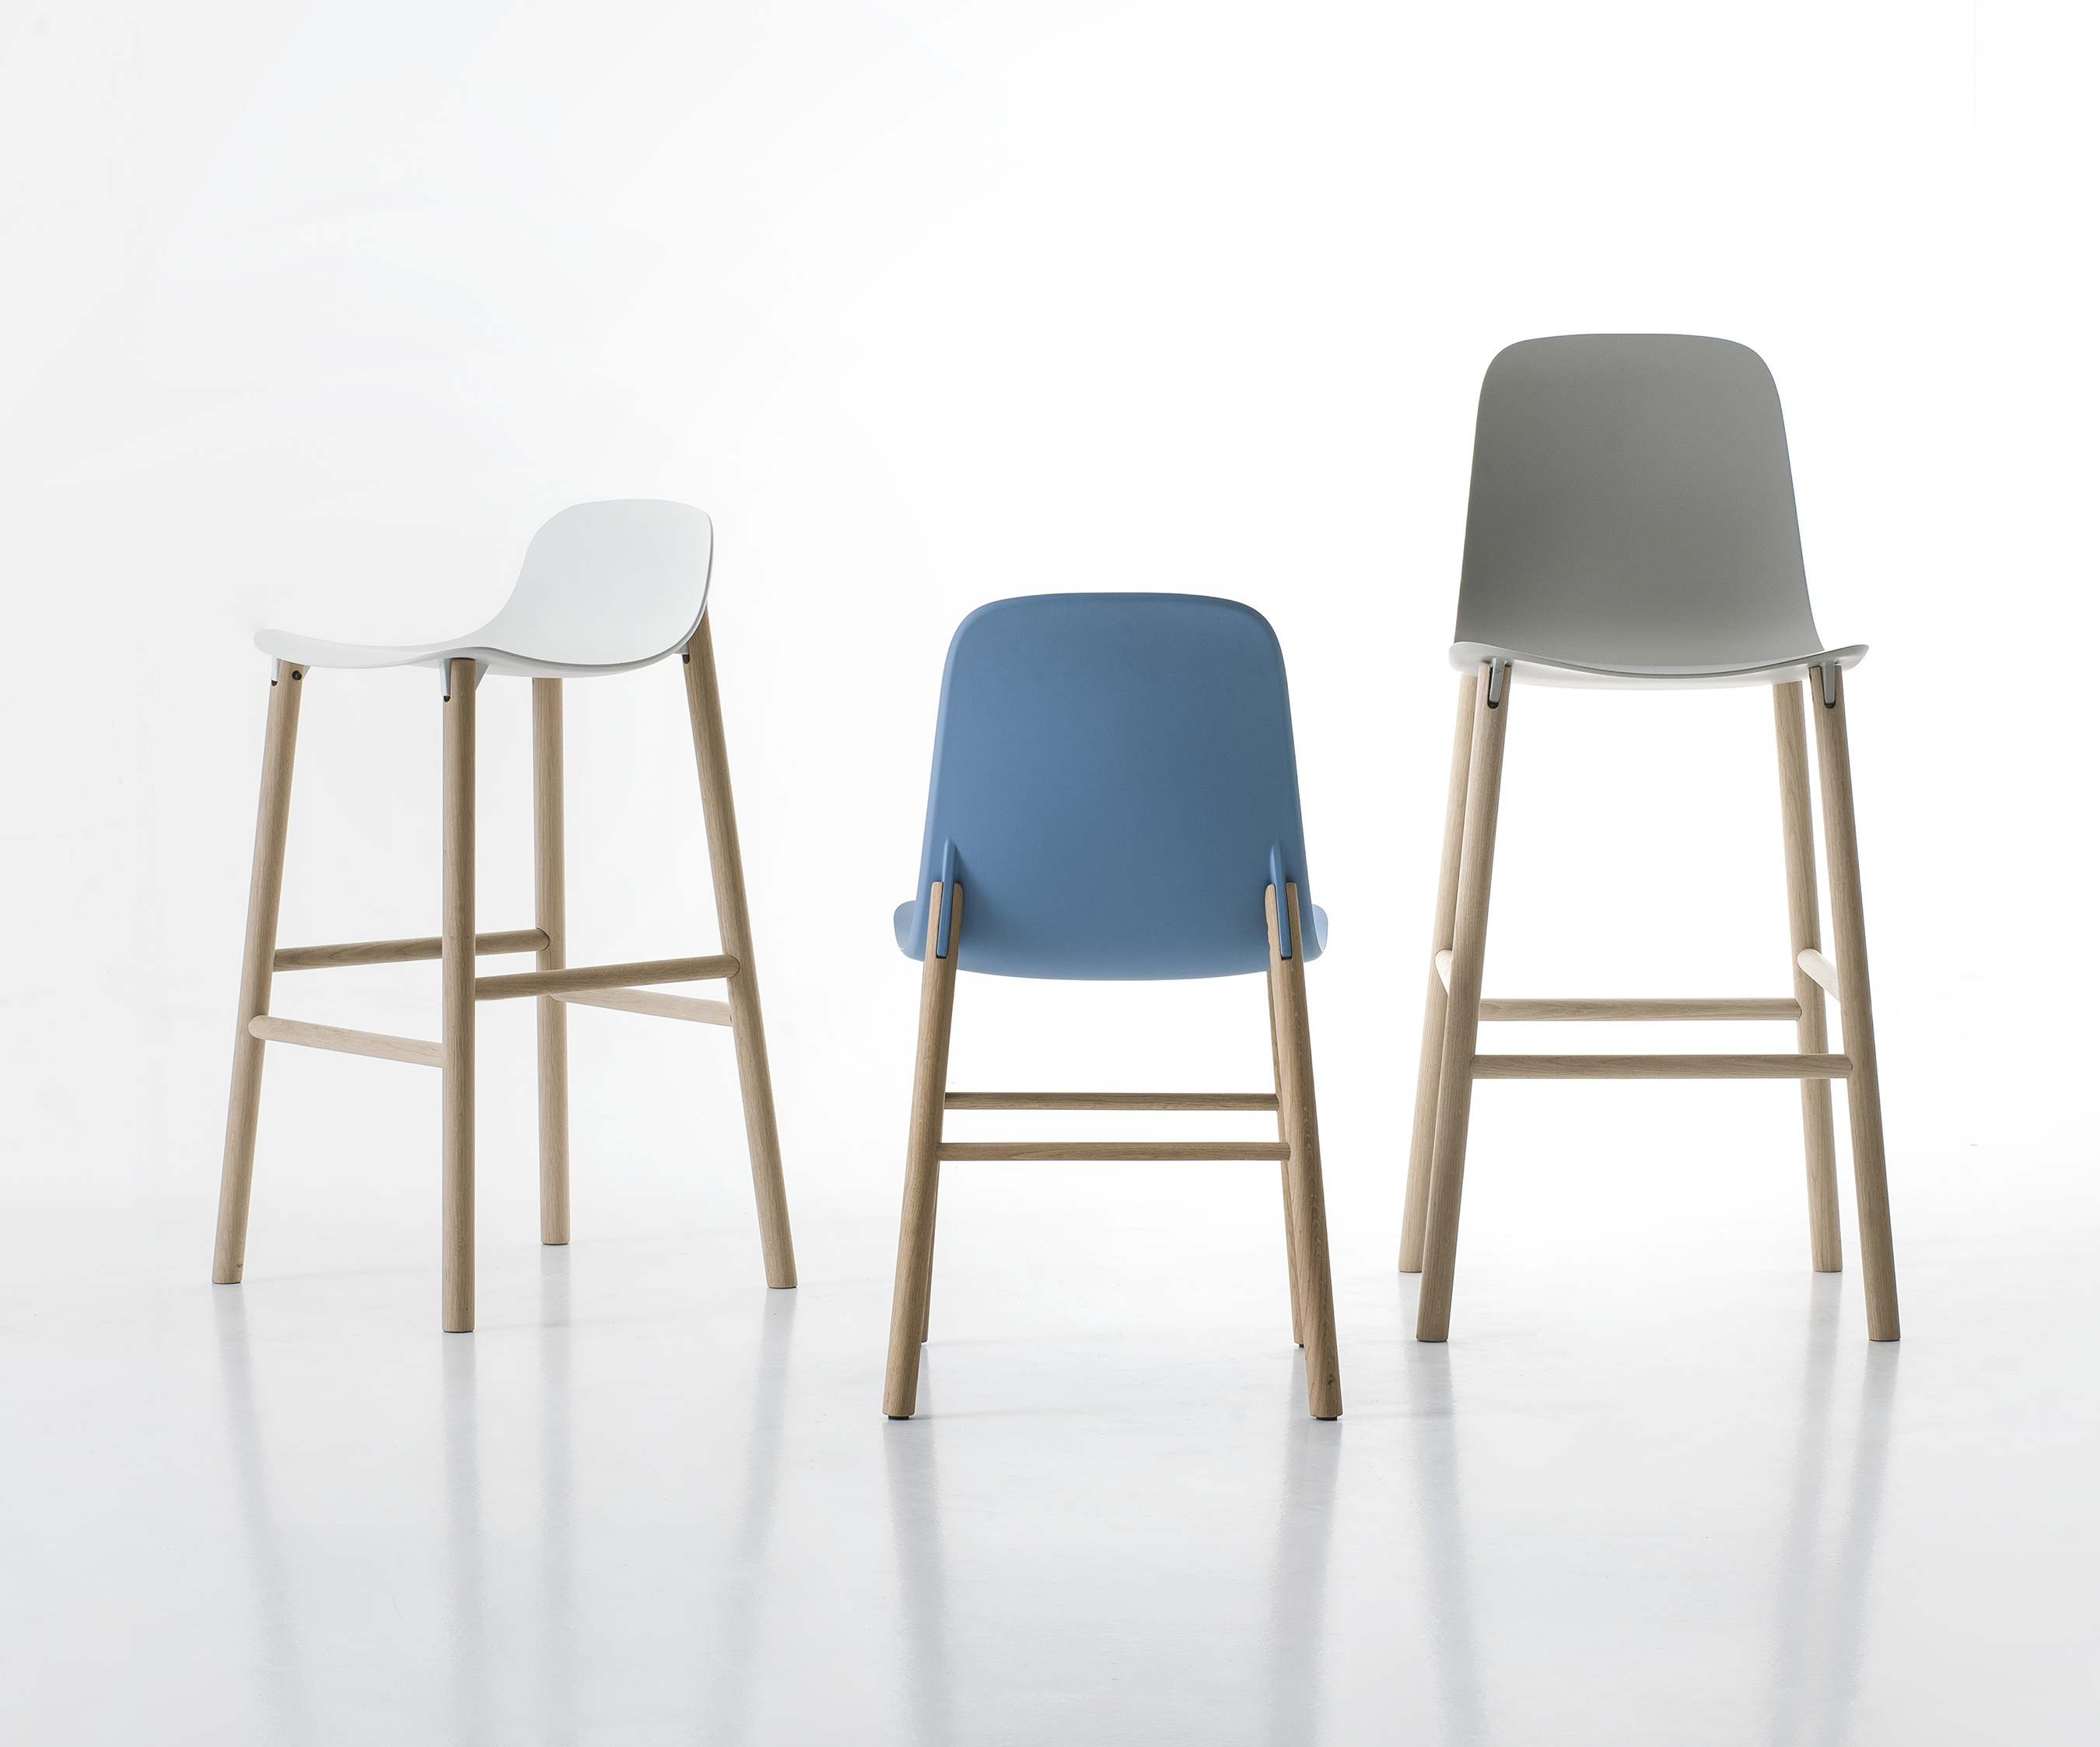 sharky stool by neuland, eva paster and michael geldmacher for kristalia.